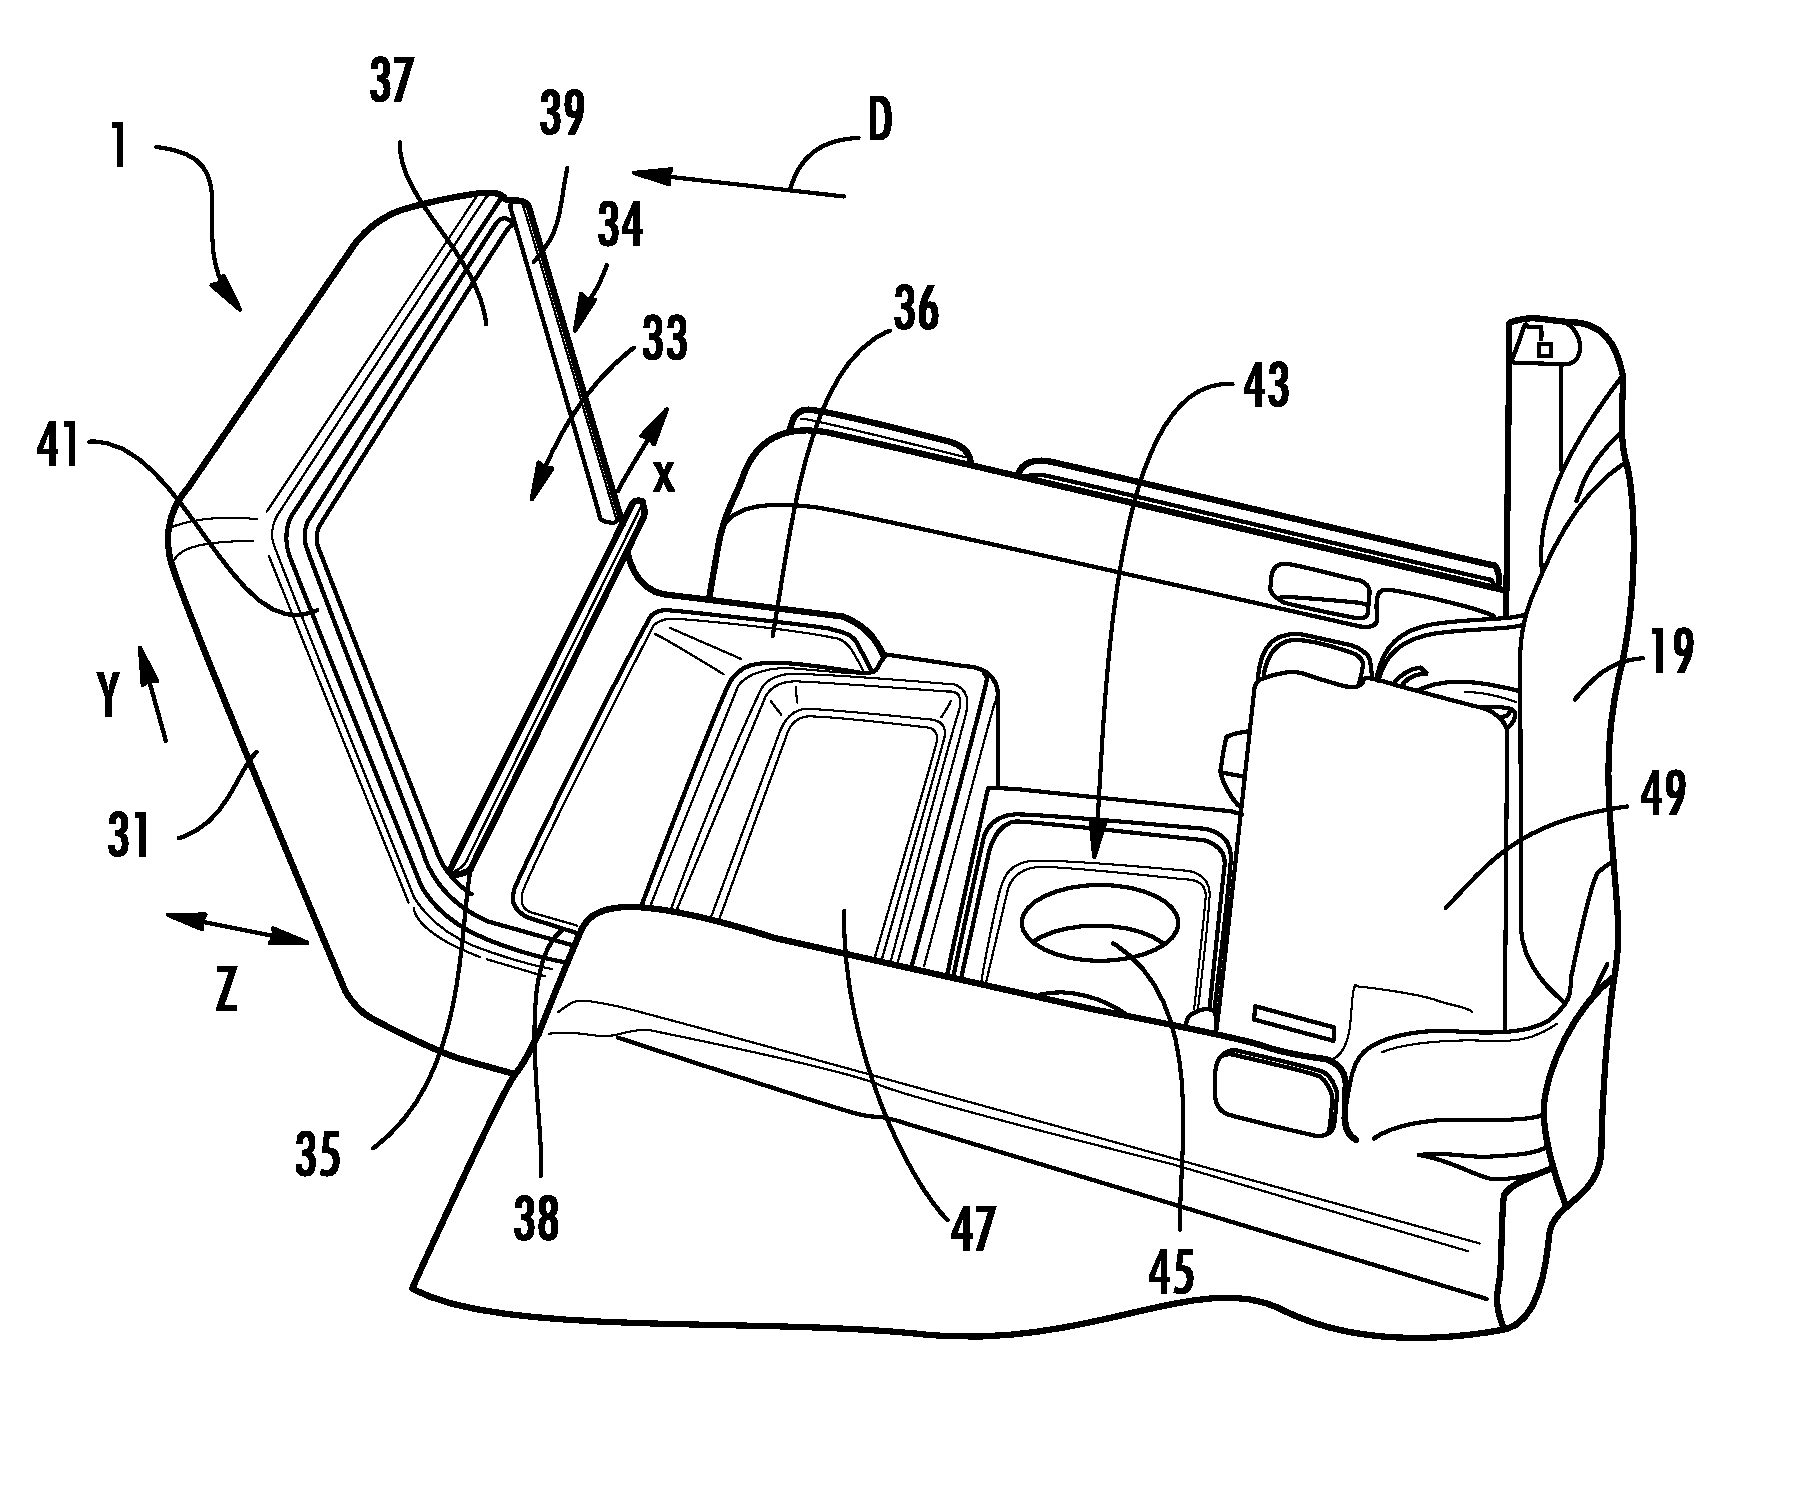 Charging integration system for a vehicle